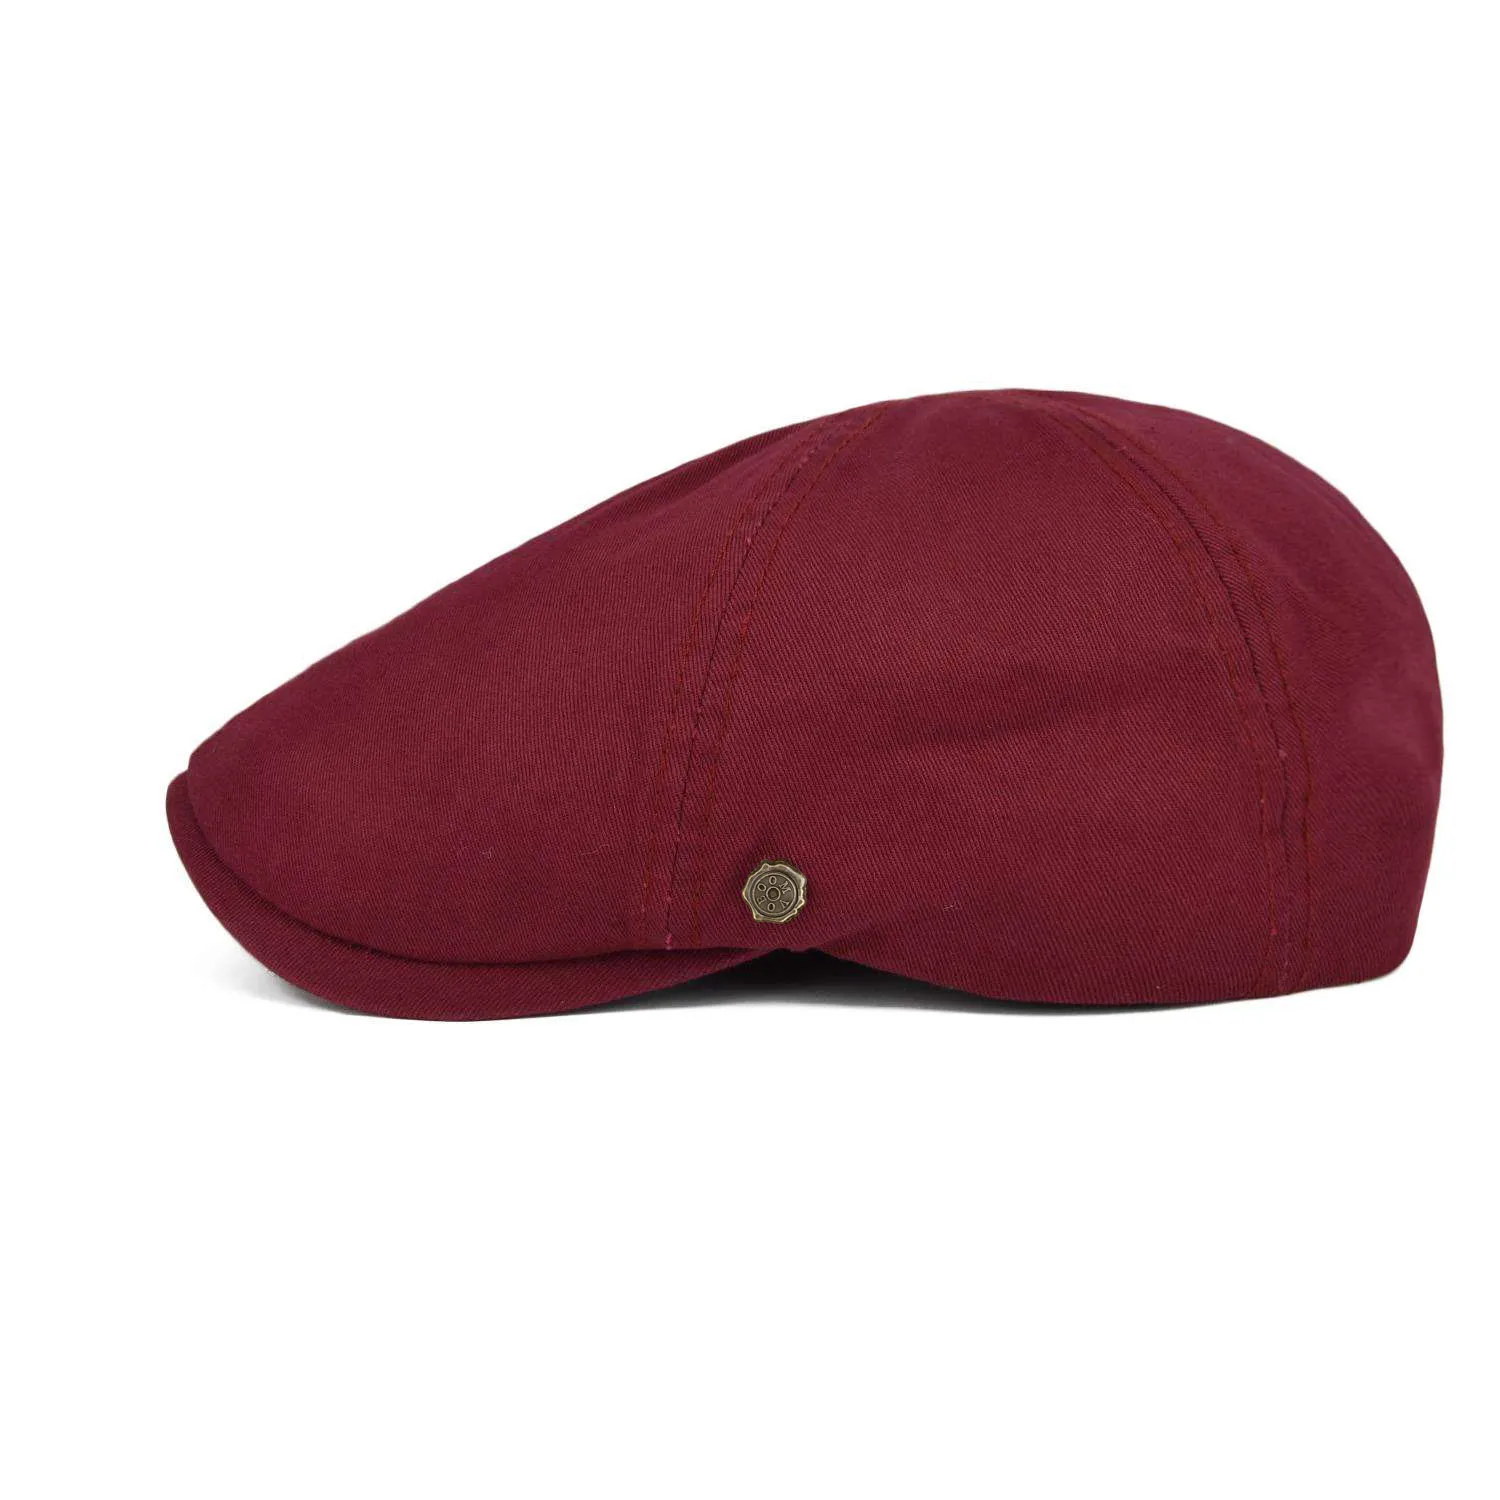 VOBOOM Red Summer Cotton Flat Cap Ivy Caps Men Women Burgundy Newsboy Cabbie Driver Solid Color Casual Camouflage Beret 063 2